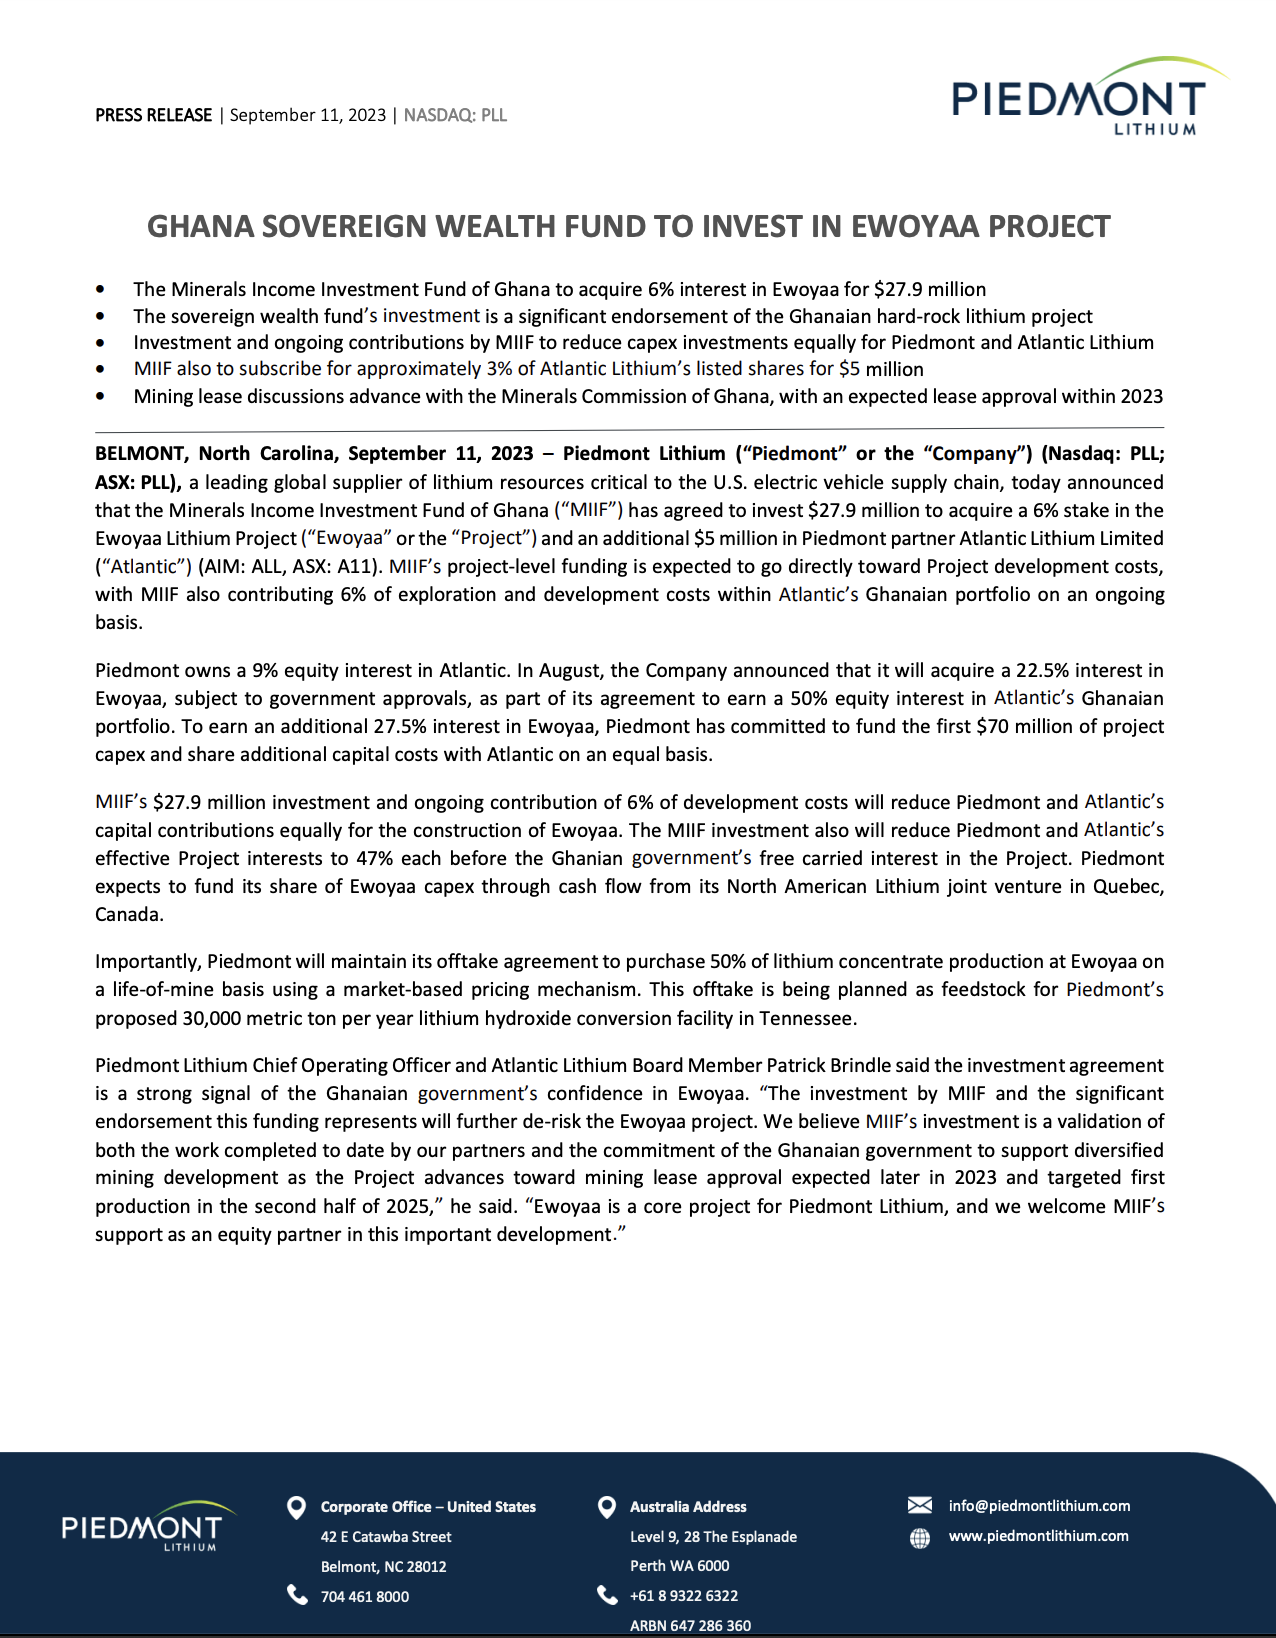 screenshot of 1st page of press release